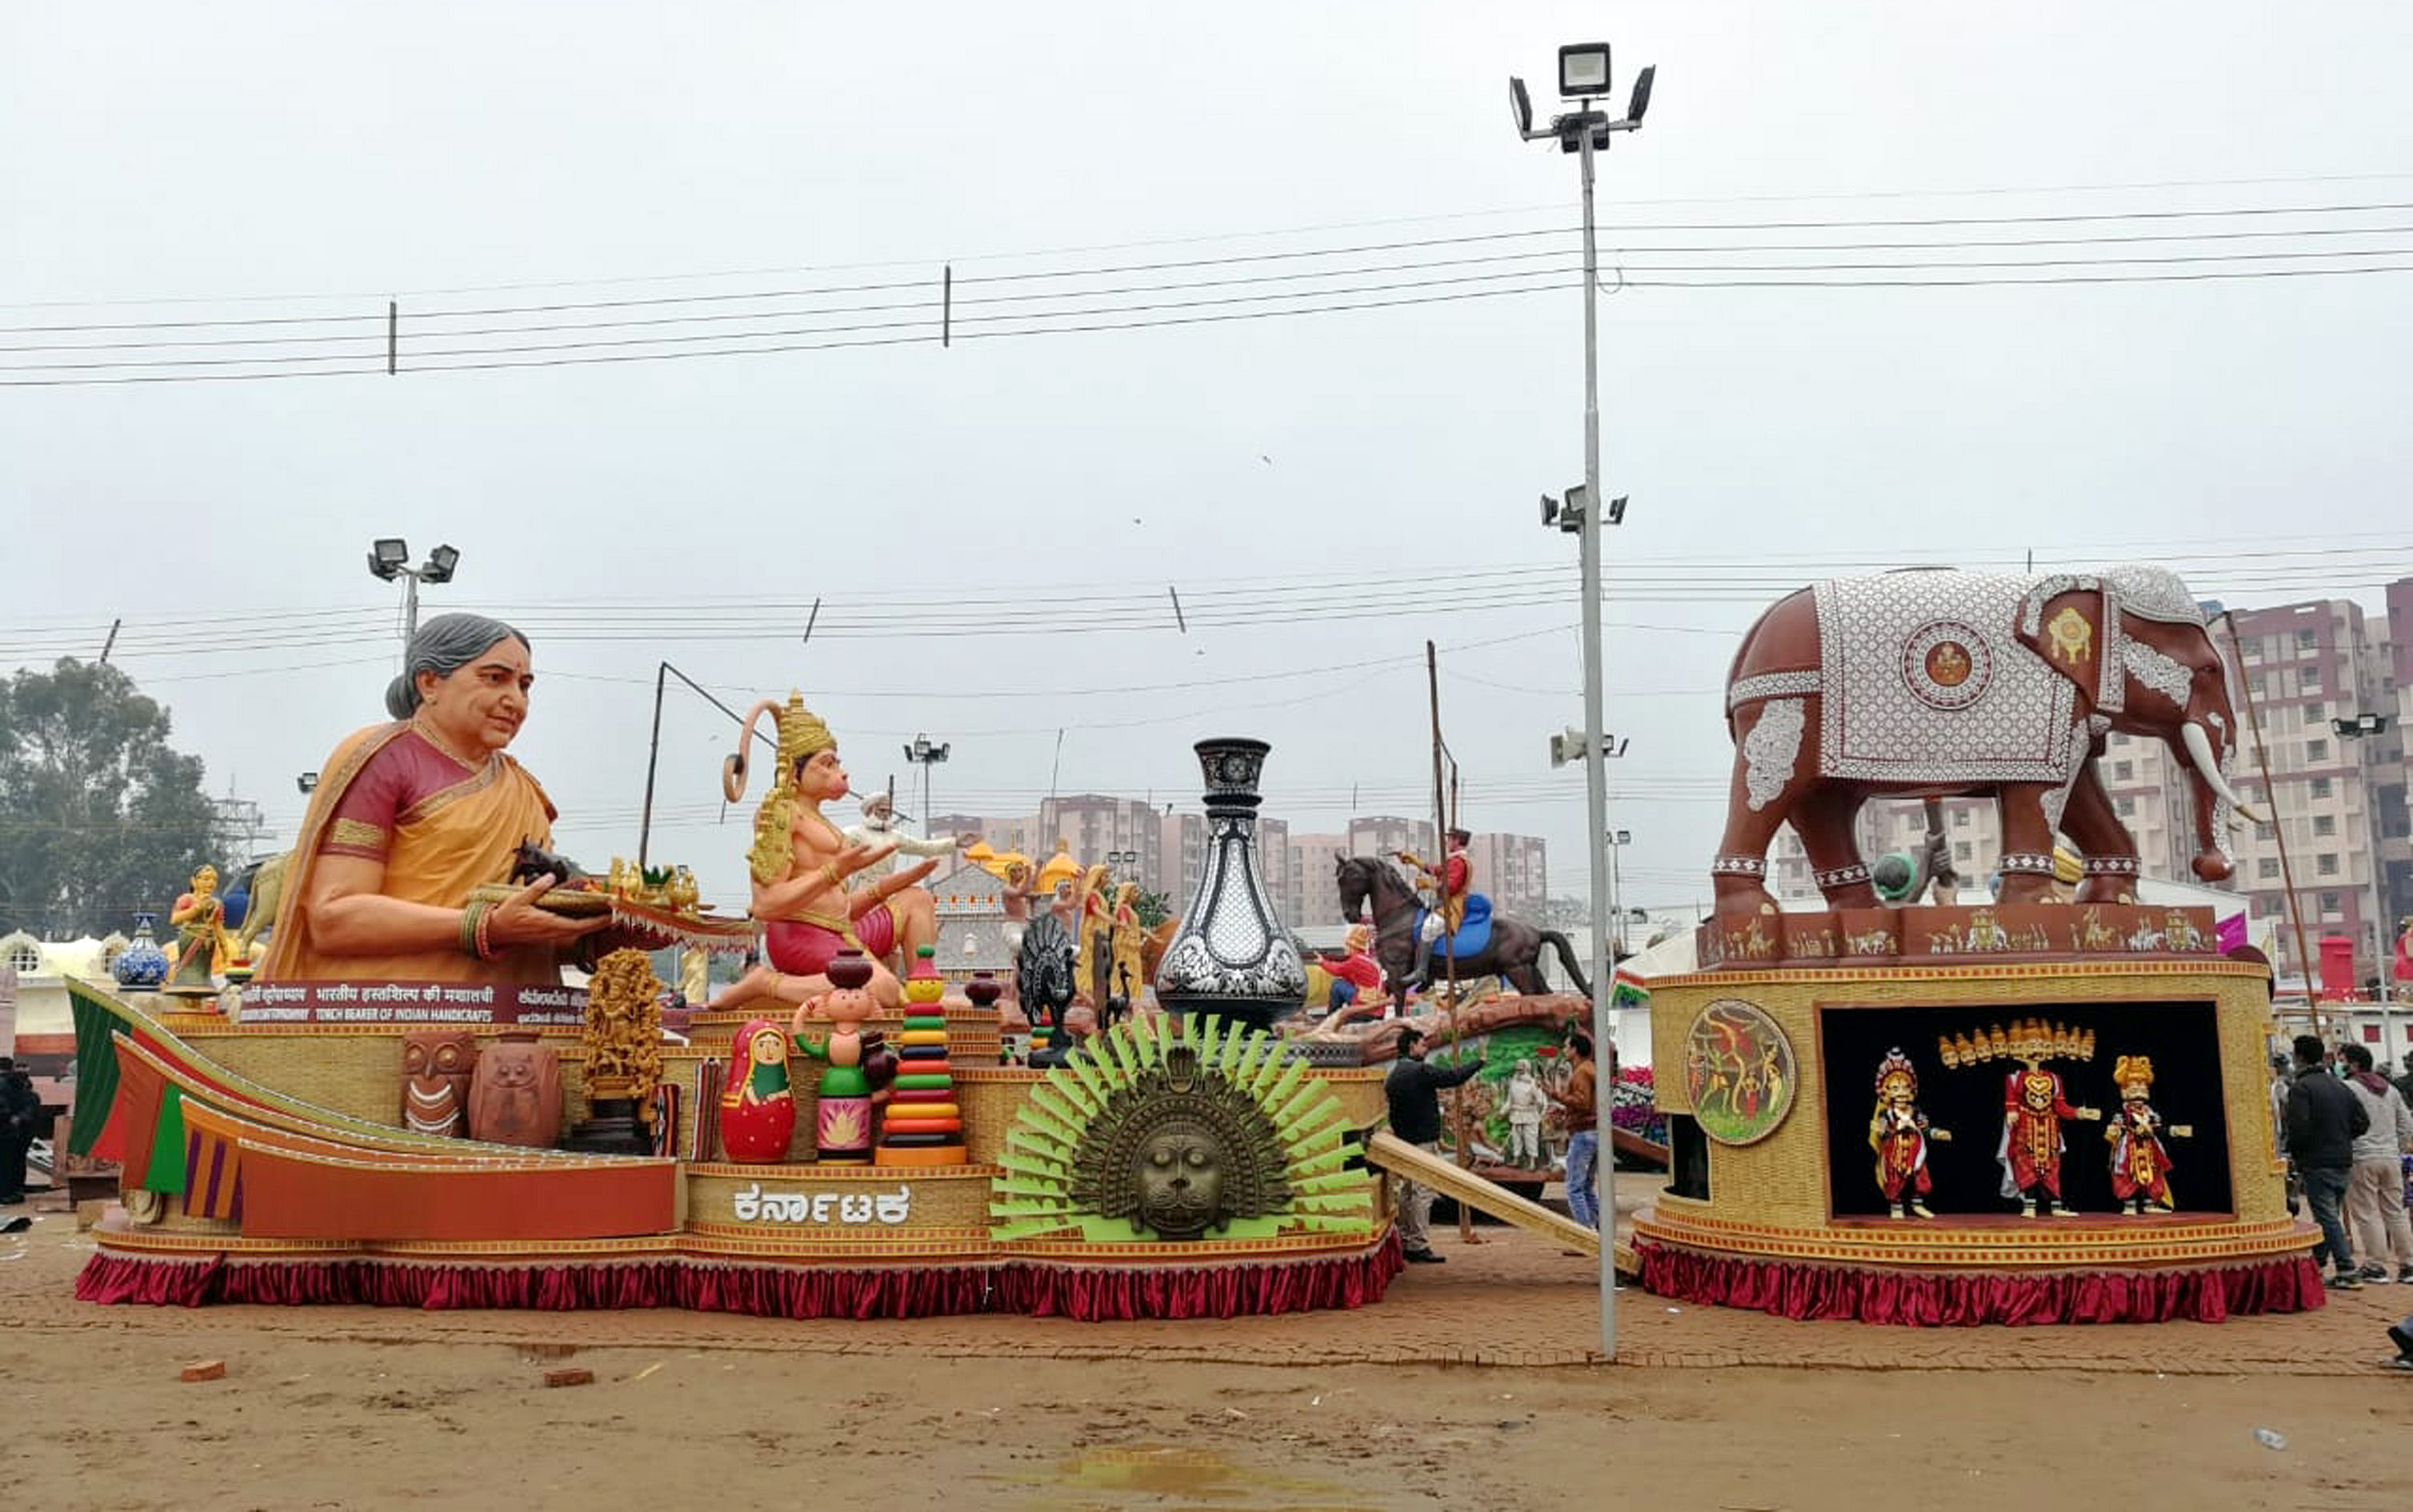 Karnataka state tableaux the cradle of traditional handicrafts is exhibit at Republic Day parade in New Delhi. Credit: DH Photo